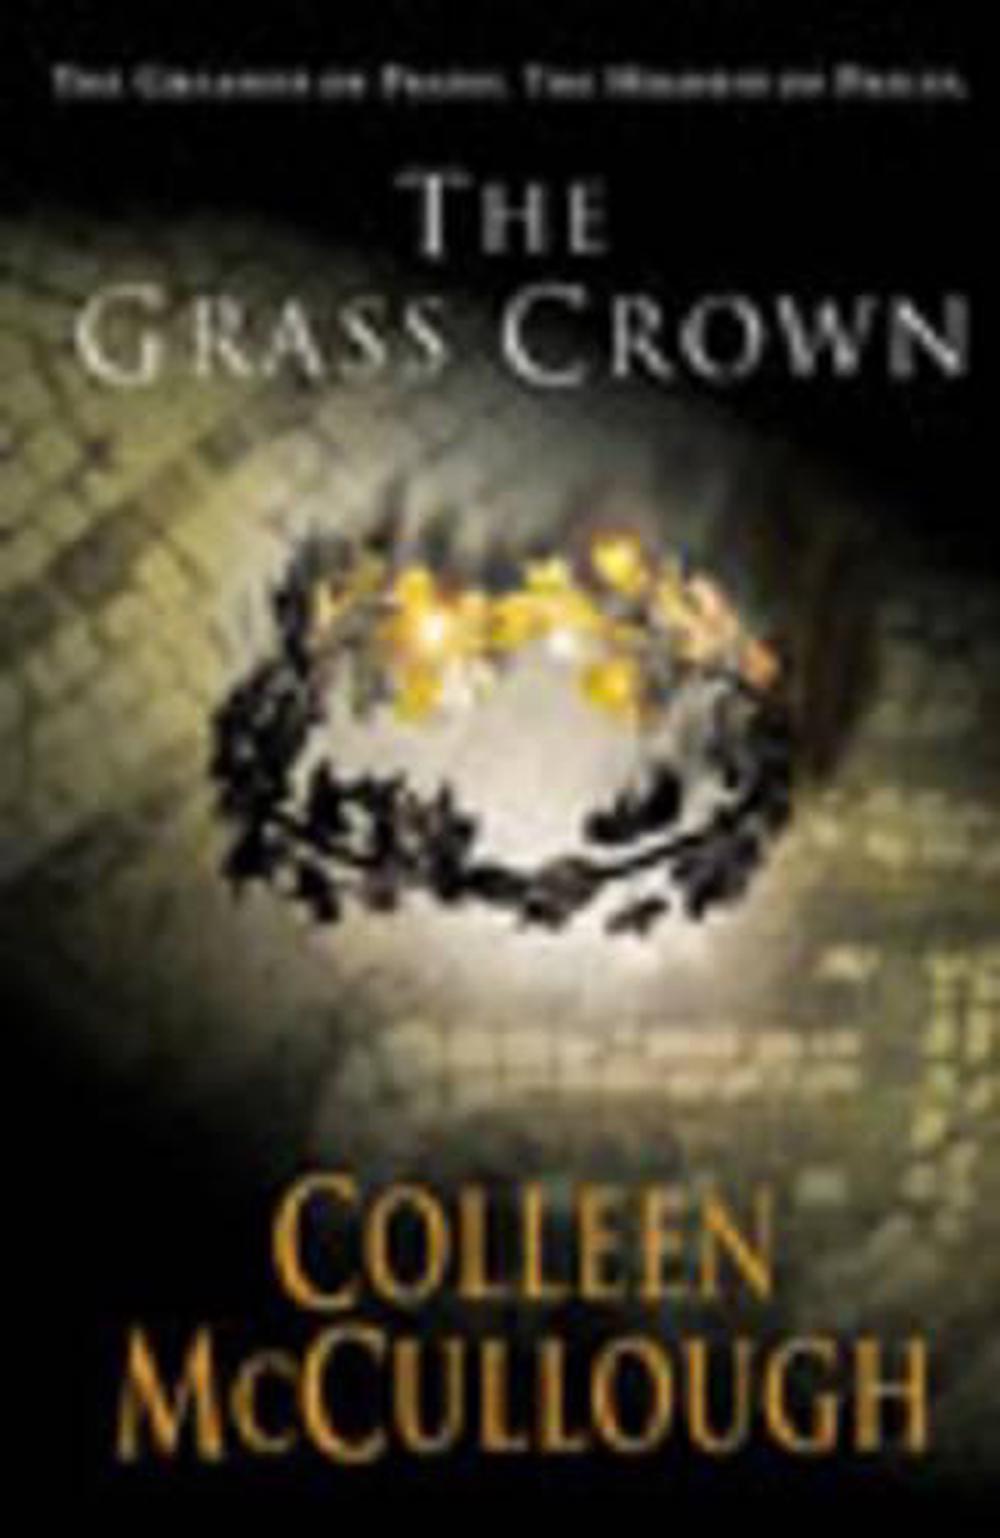 the grass crown colleen mccullough